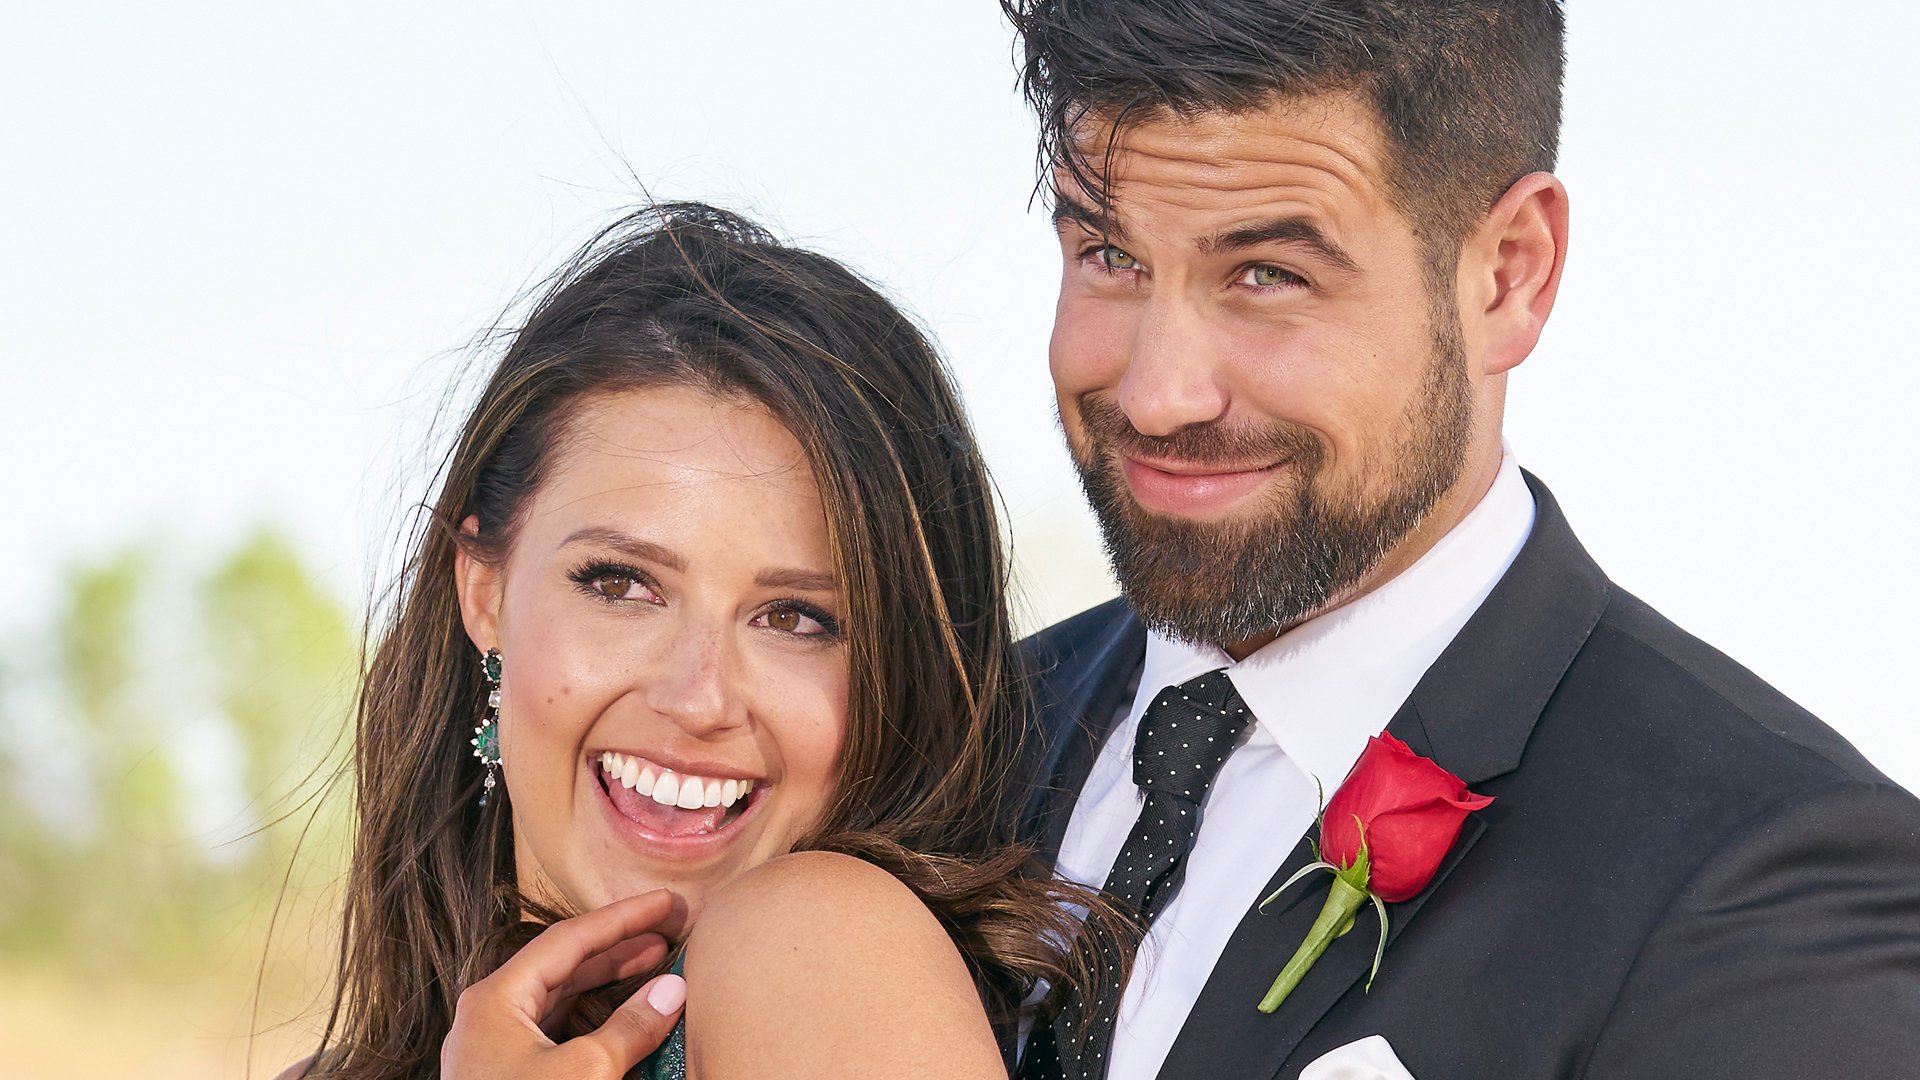 Katie Thurston and Blake Moynes pose together after getting engaged in ‘The Bachelorette' 2021 finale